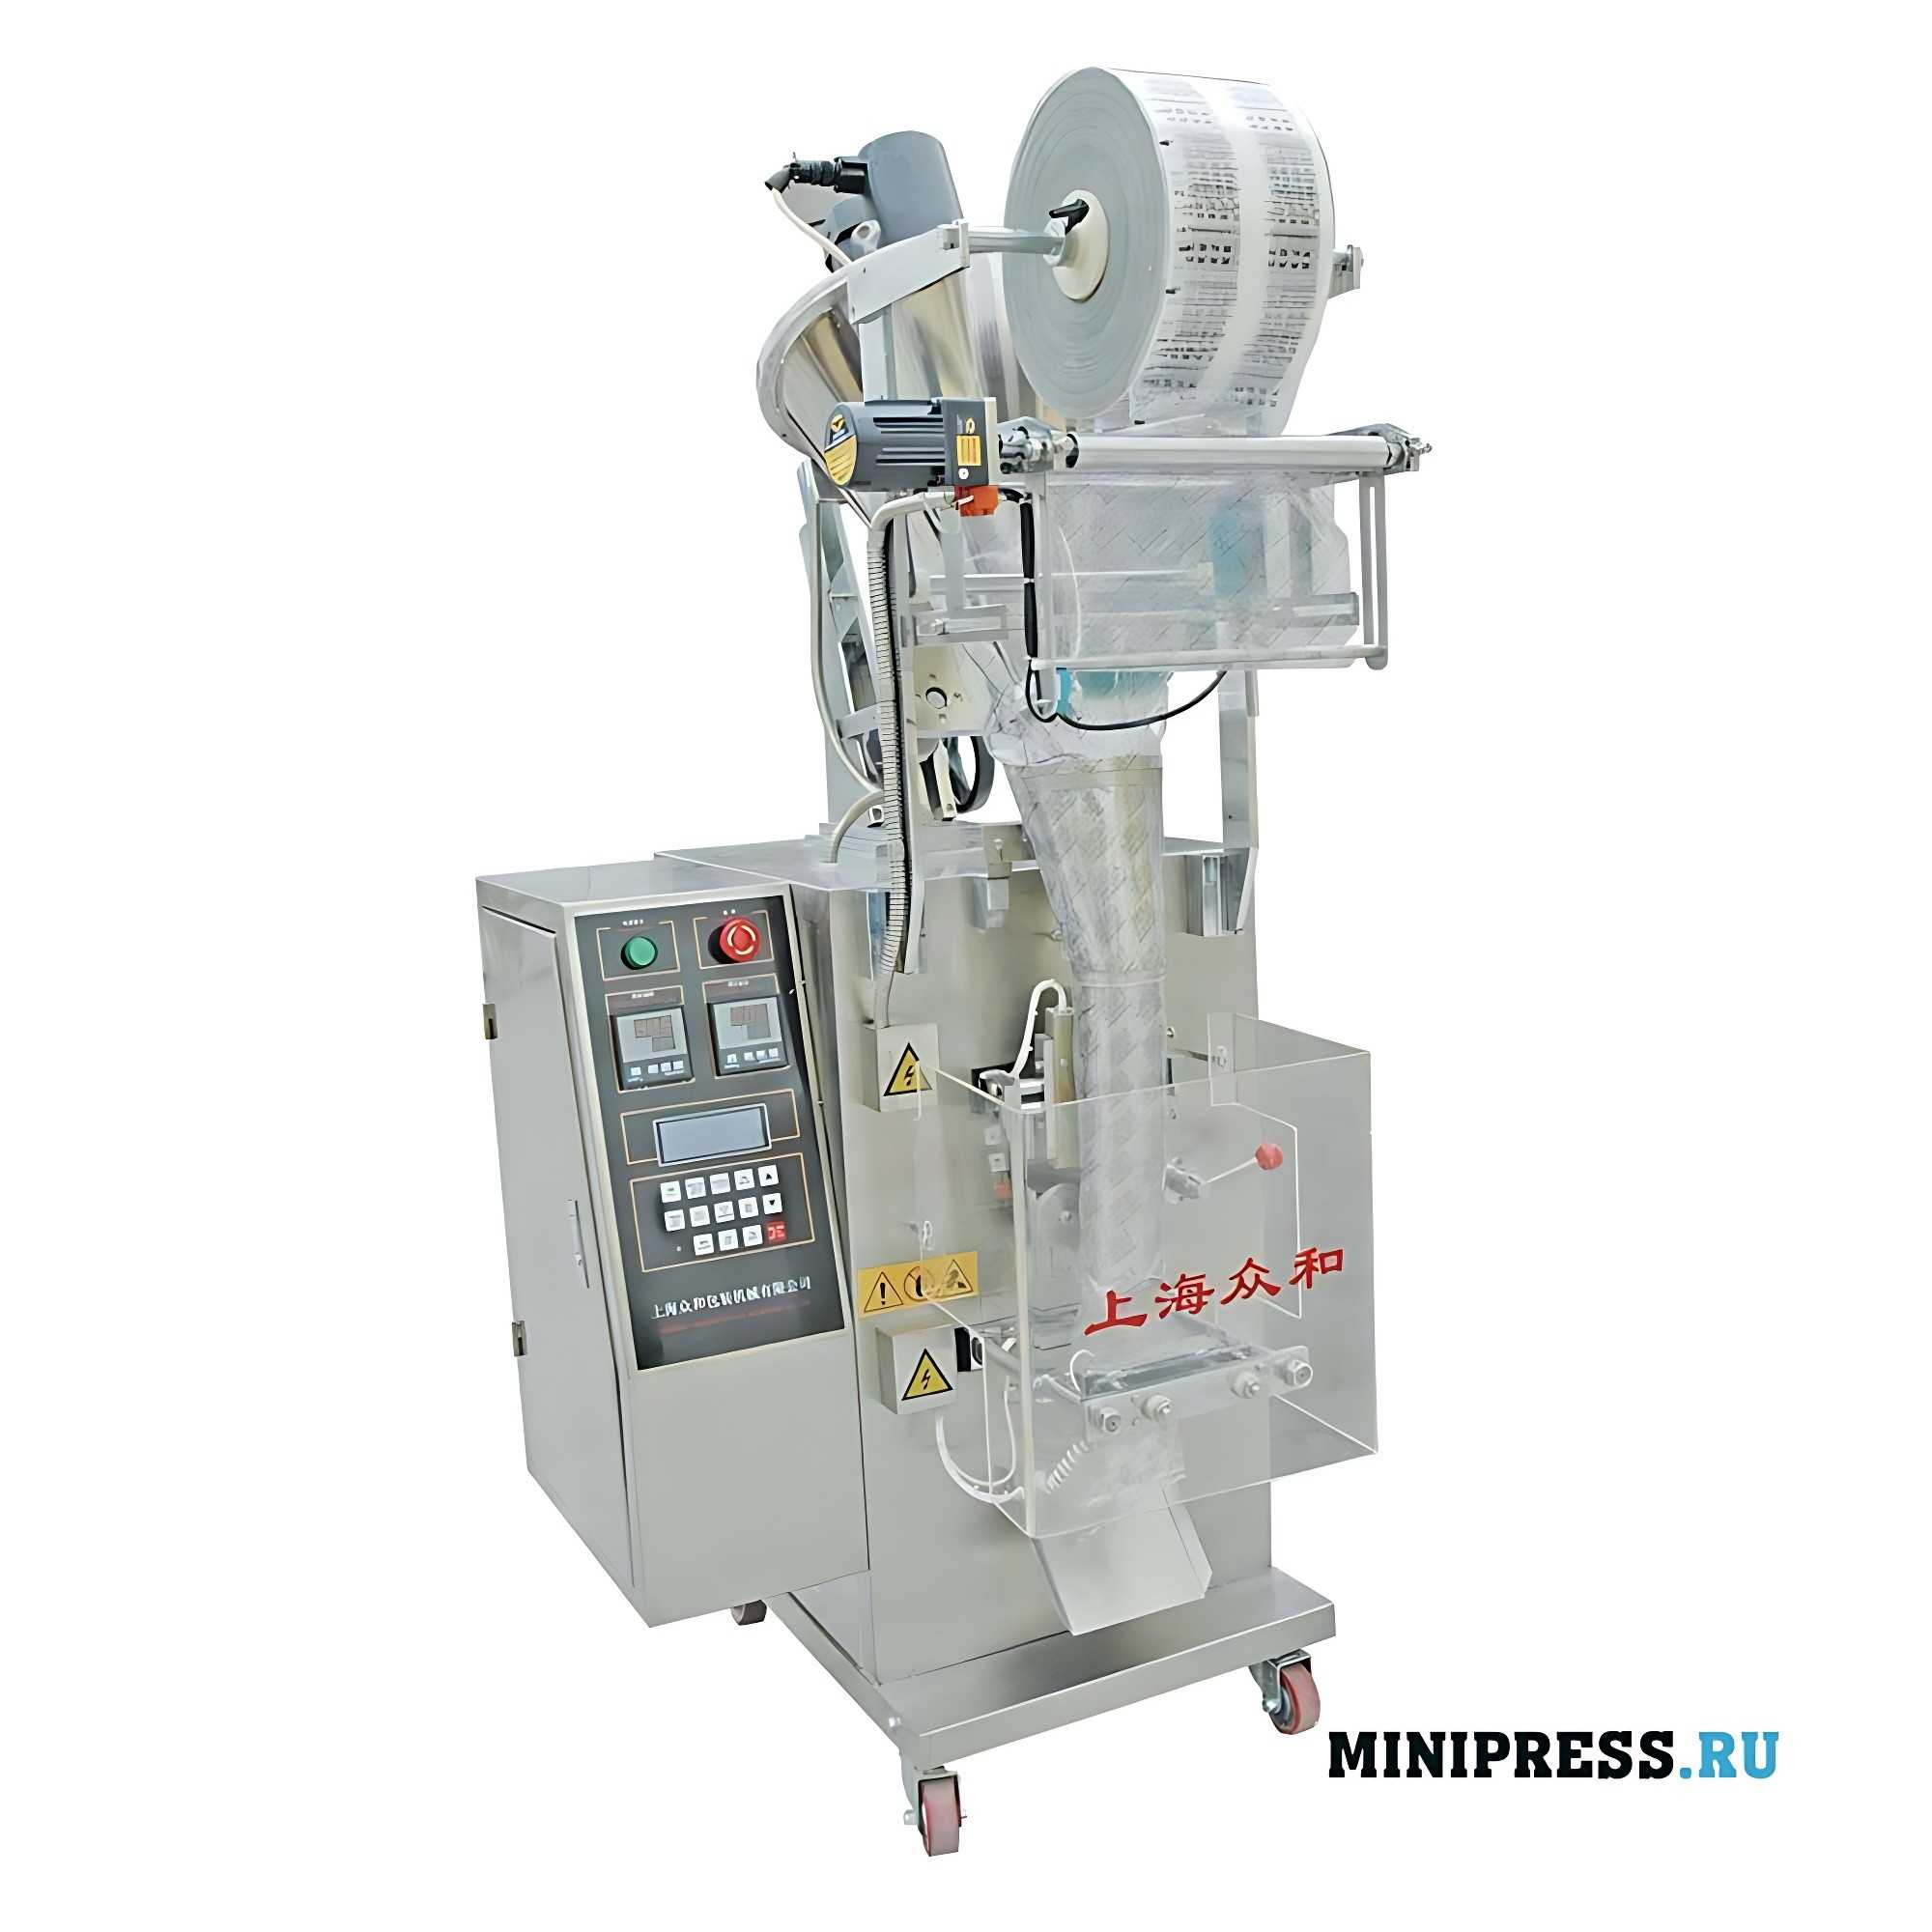 Equipment for automatic powder packing and package sealing With ZP 09